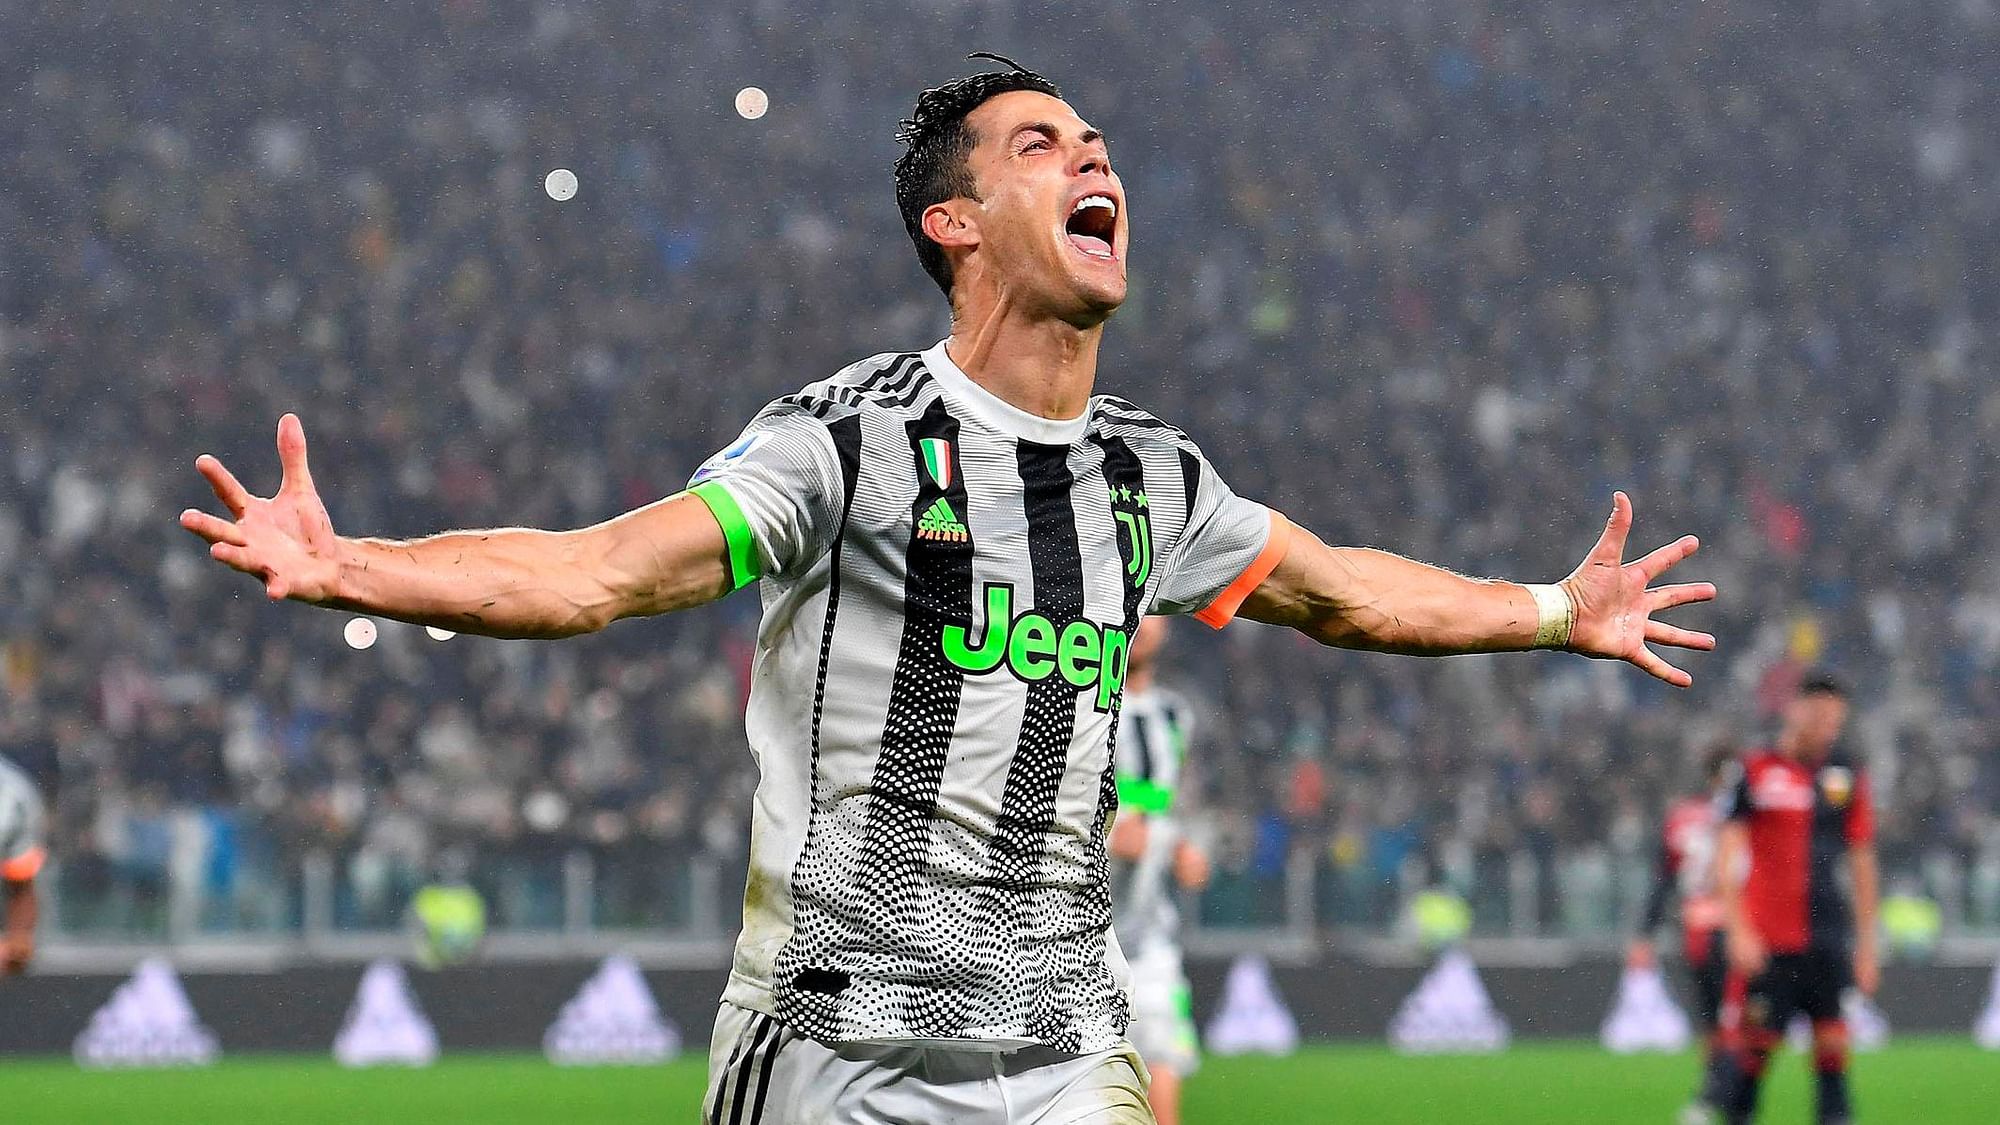 A stoppage-time penalty by Cristiano Ronaldo gave Juventus the 2-1 win over Genoa.